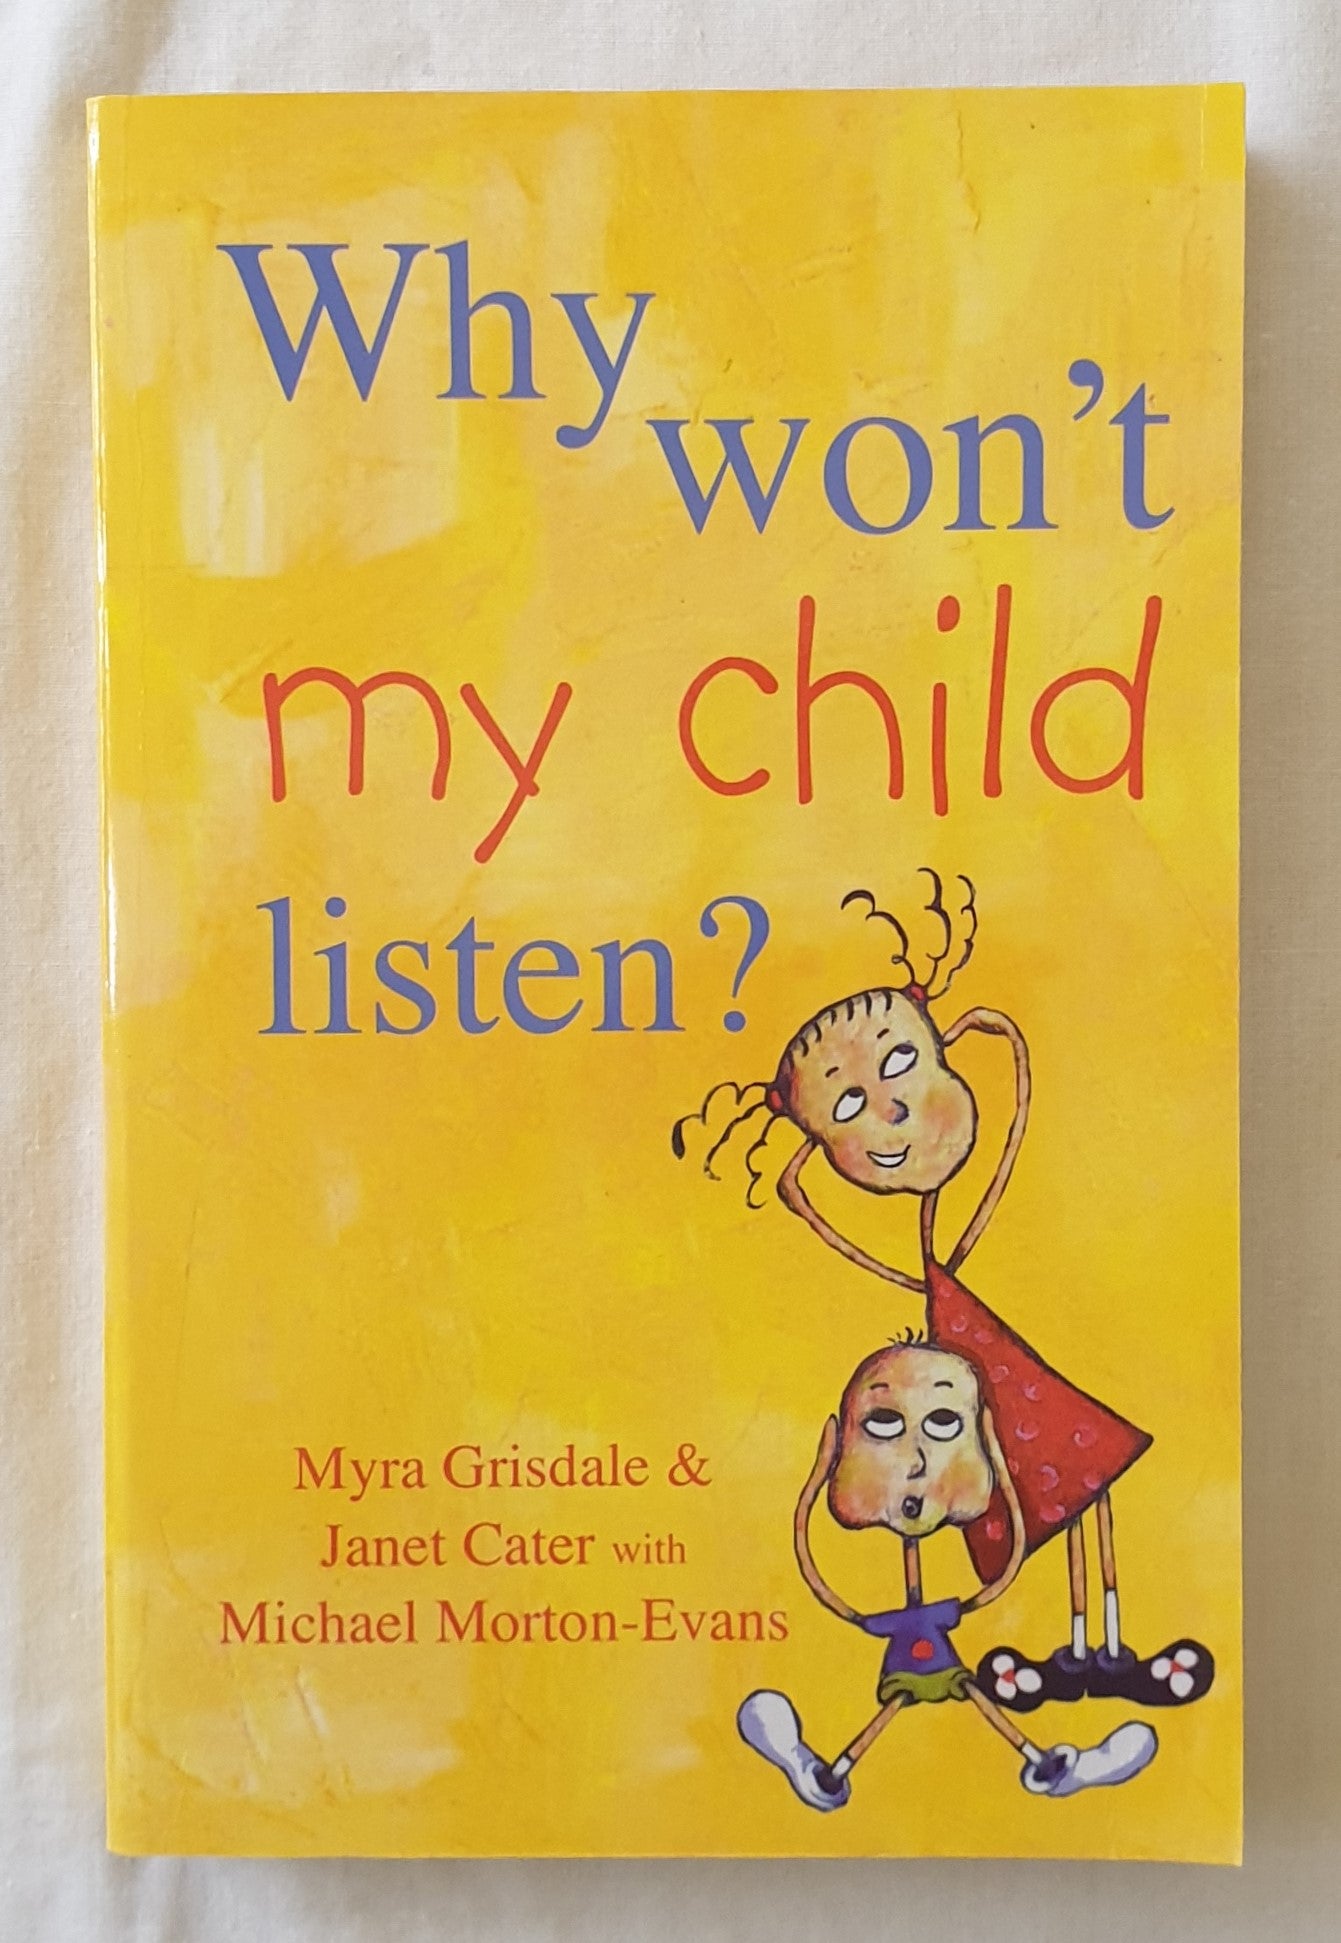 Why Won’t My Child Listen by Myra Grisdale and Janet Cater with Michael Morton-Evans